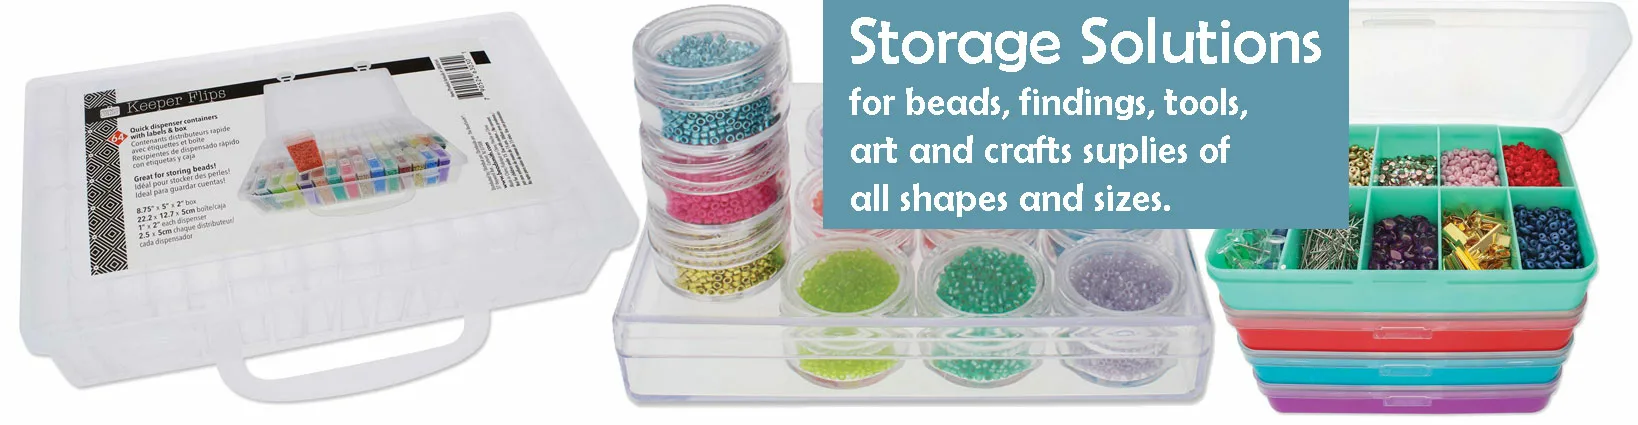 Bead and Craft Storage Solutions